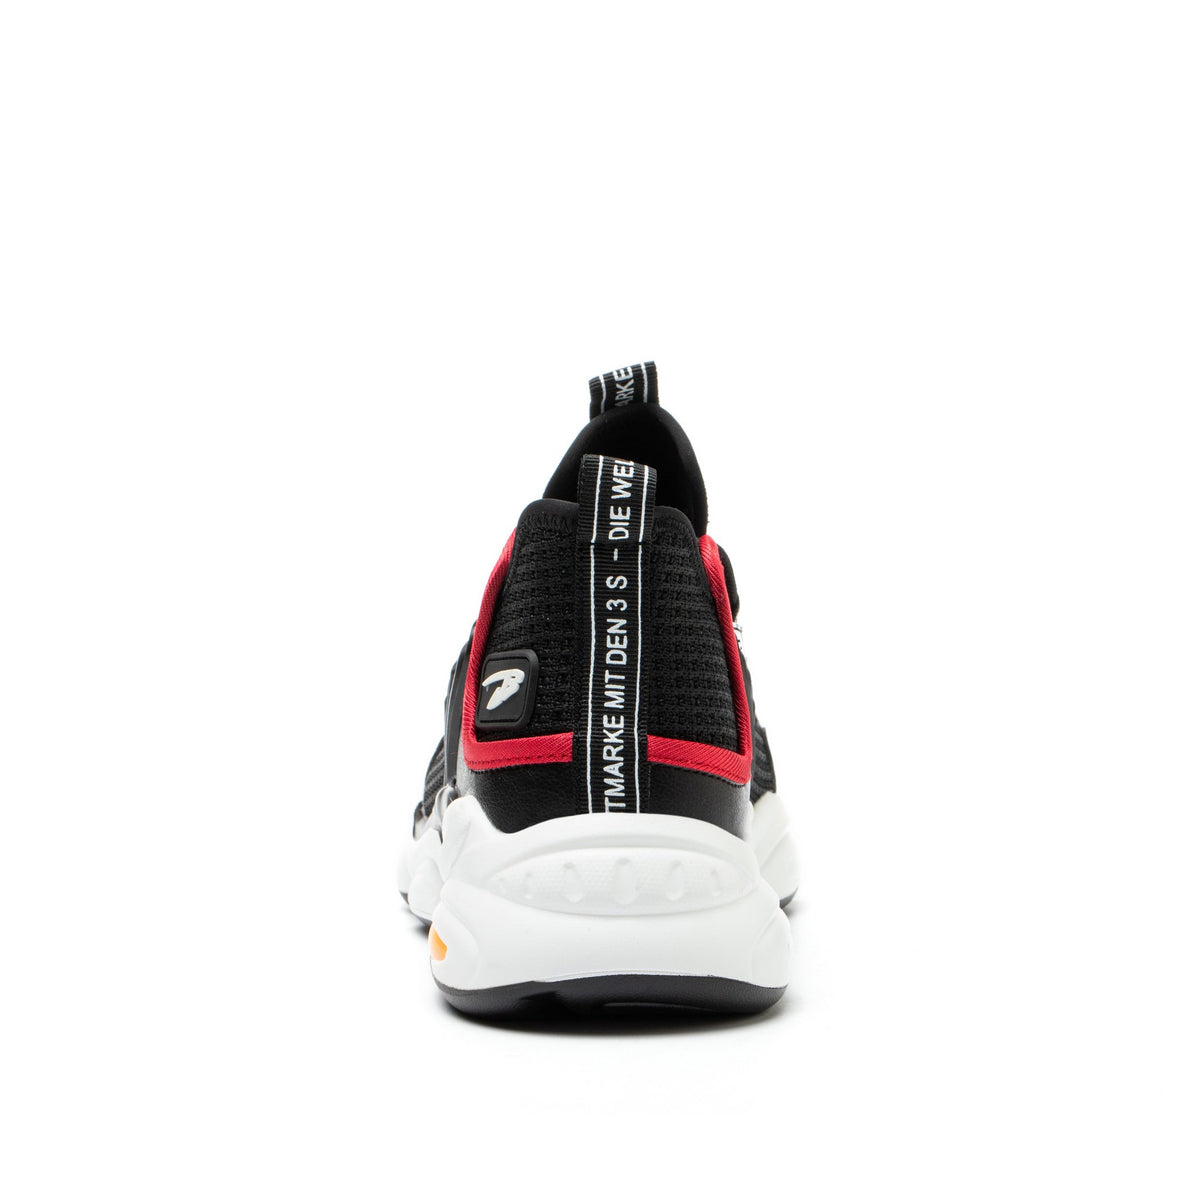 Xeno Black Red - Indestructible Shoes